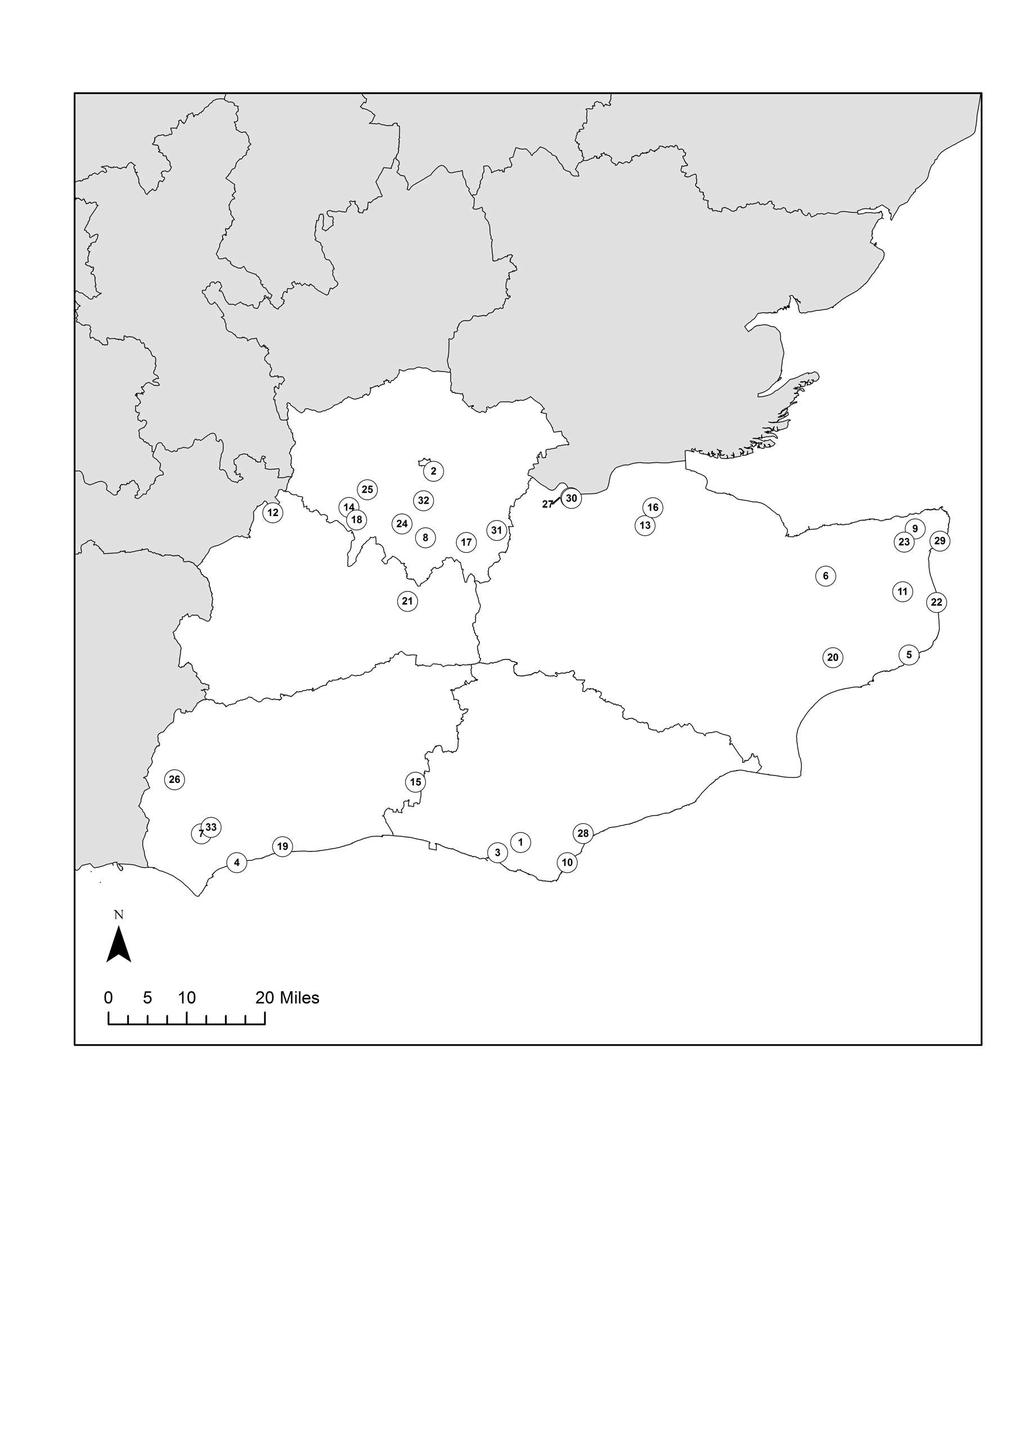 Figure 1: Map showing the location of sites mentioned in the text.